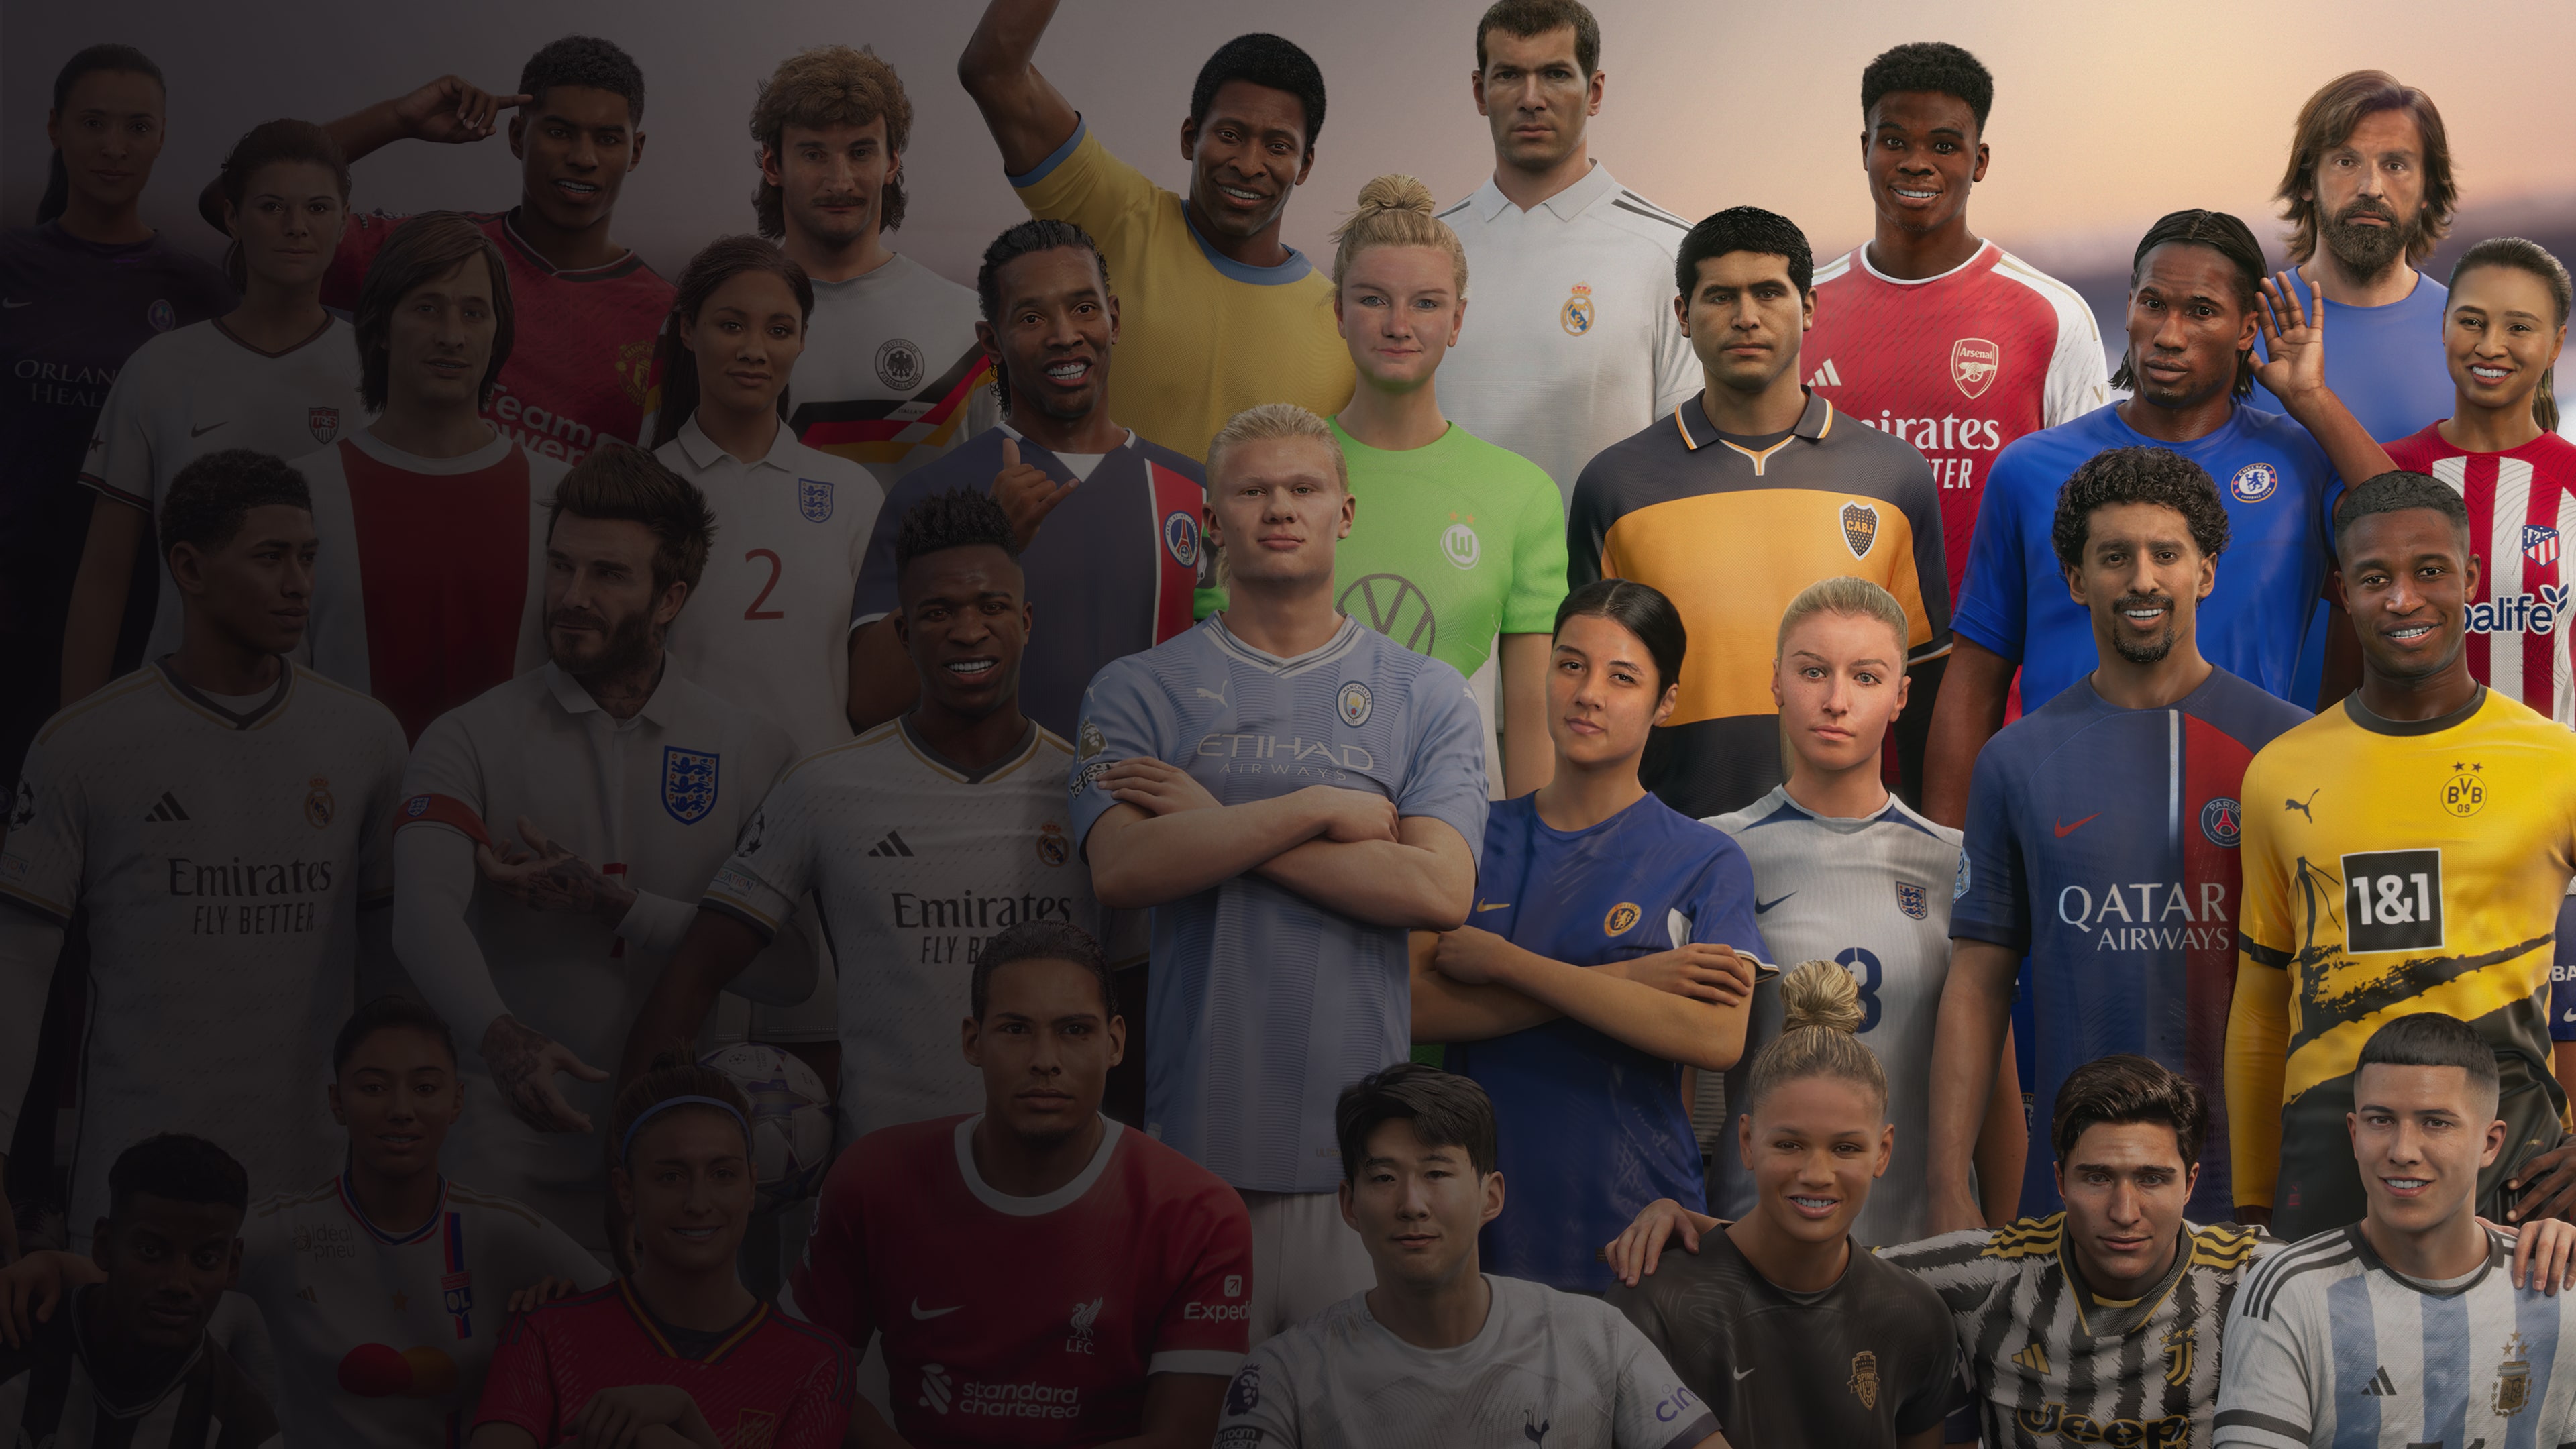 EA Sports FC 24 Launches New eSports Opportunity for the Every Man - Want to be Paid to Play?